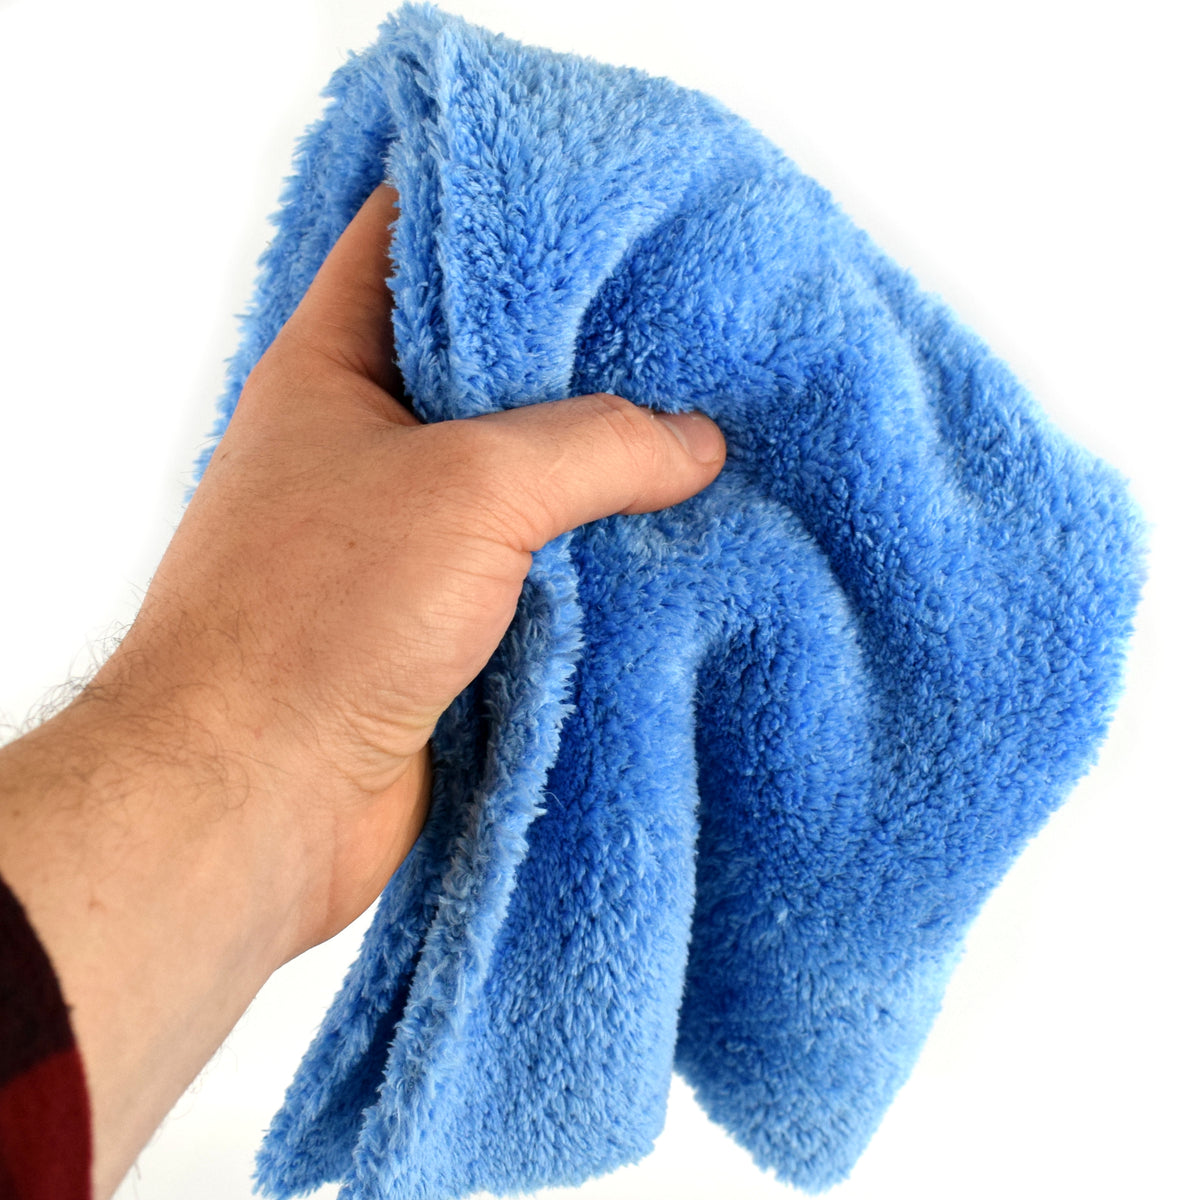 Signature Microfiber Towels for Polishing, Buffing and Touch-ups